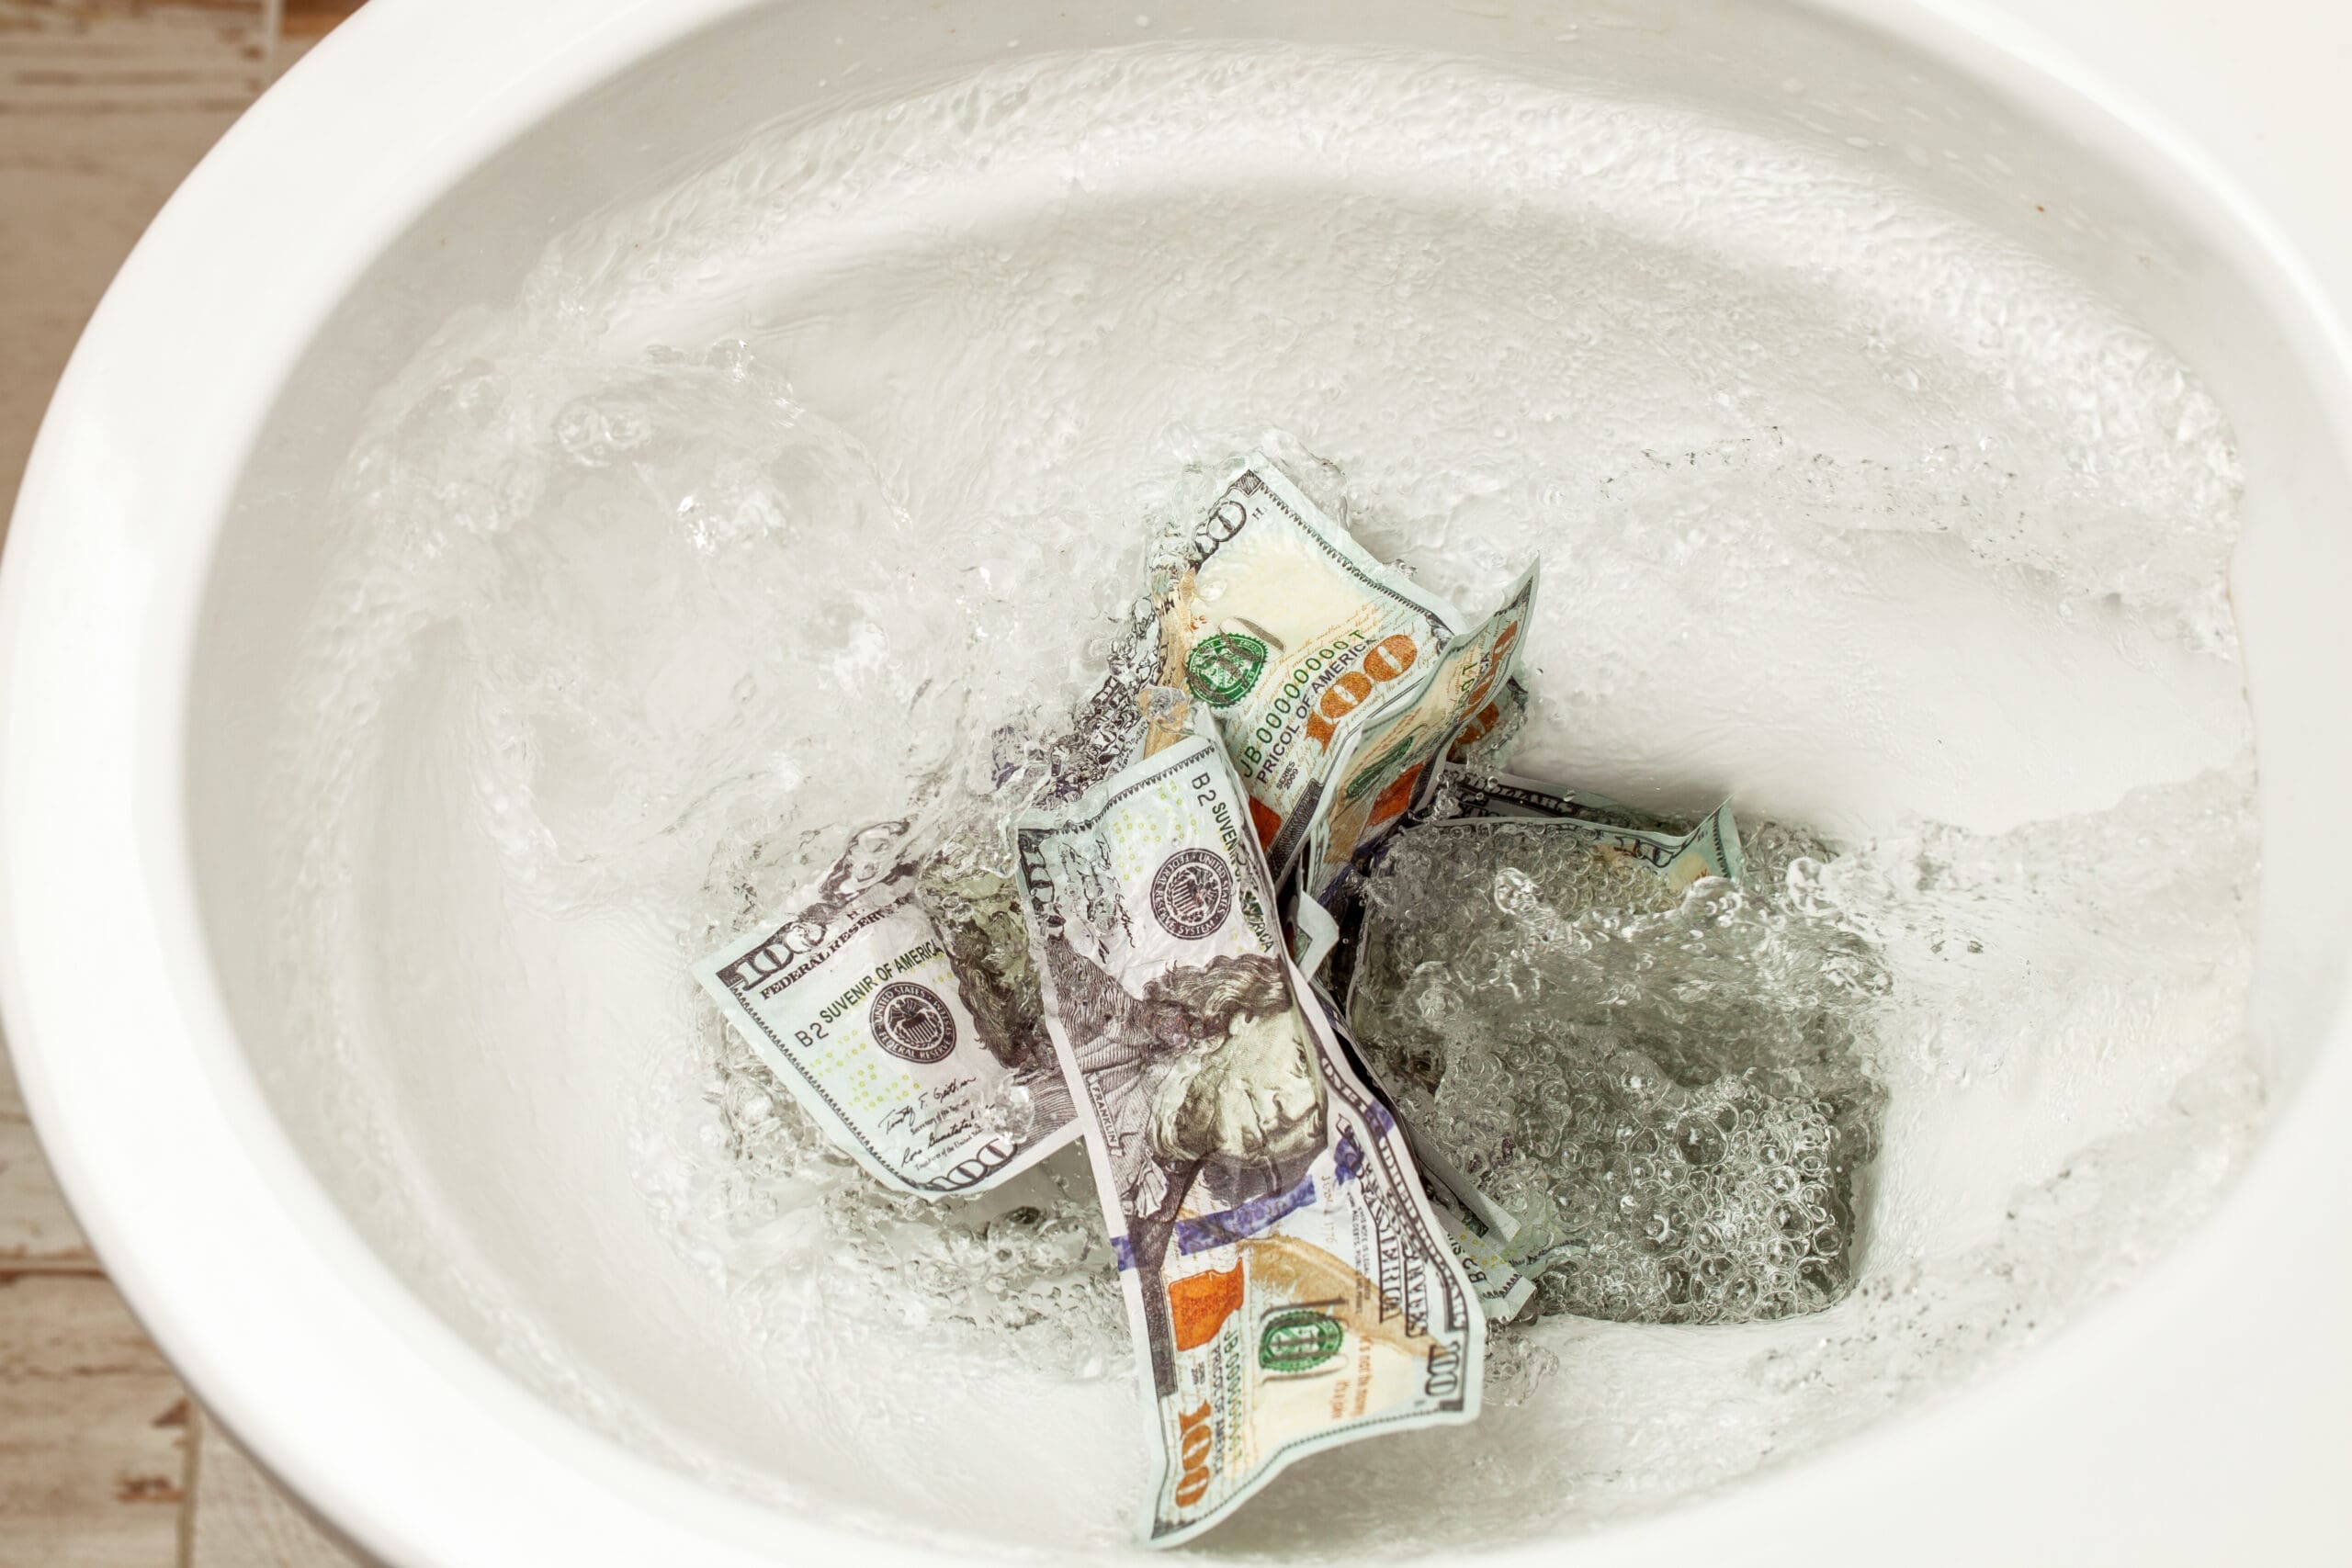 Cash dollars are flushed into the toilet.